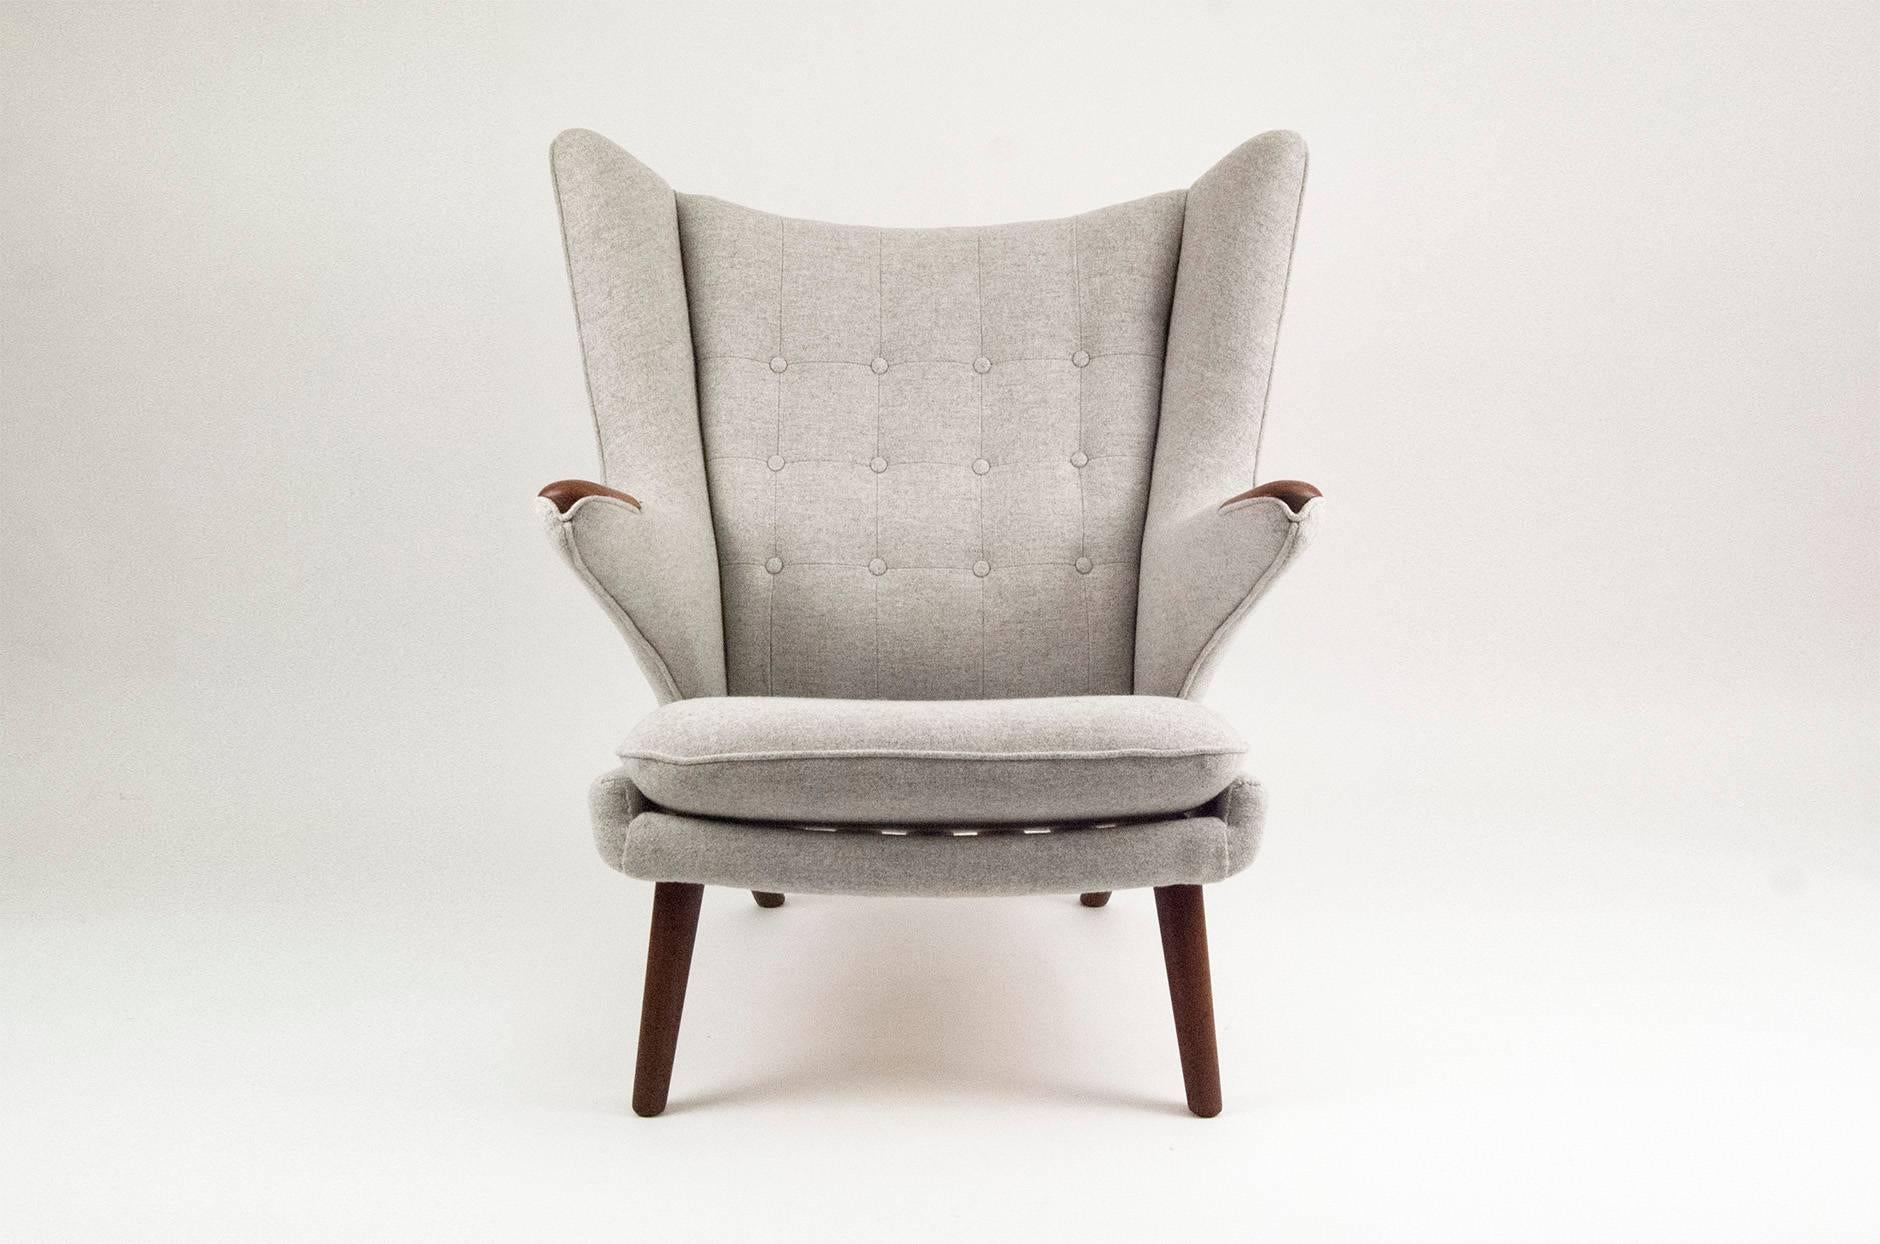 Designed for AP Stolen in 1951, this is possibly Wegner's most iconic design. This model features teak 'paws' and Afromosia legs. The chair has been reupholstered in Kvadrat Tonus Meadow wool fabric.